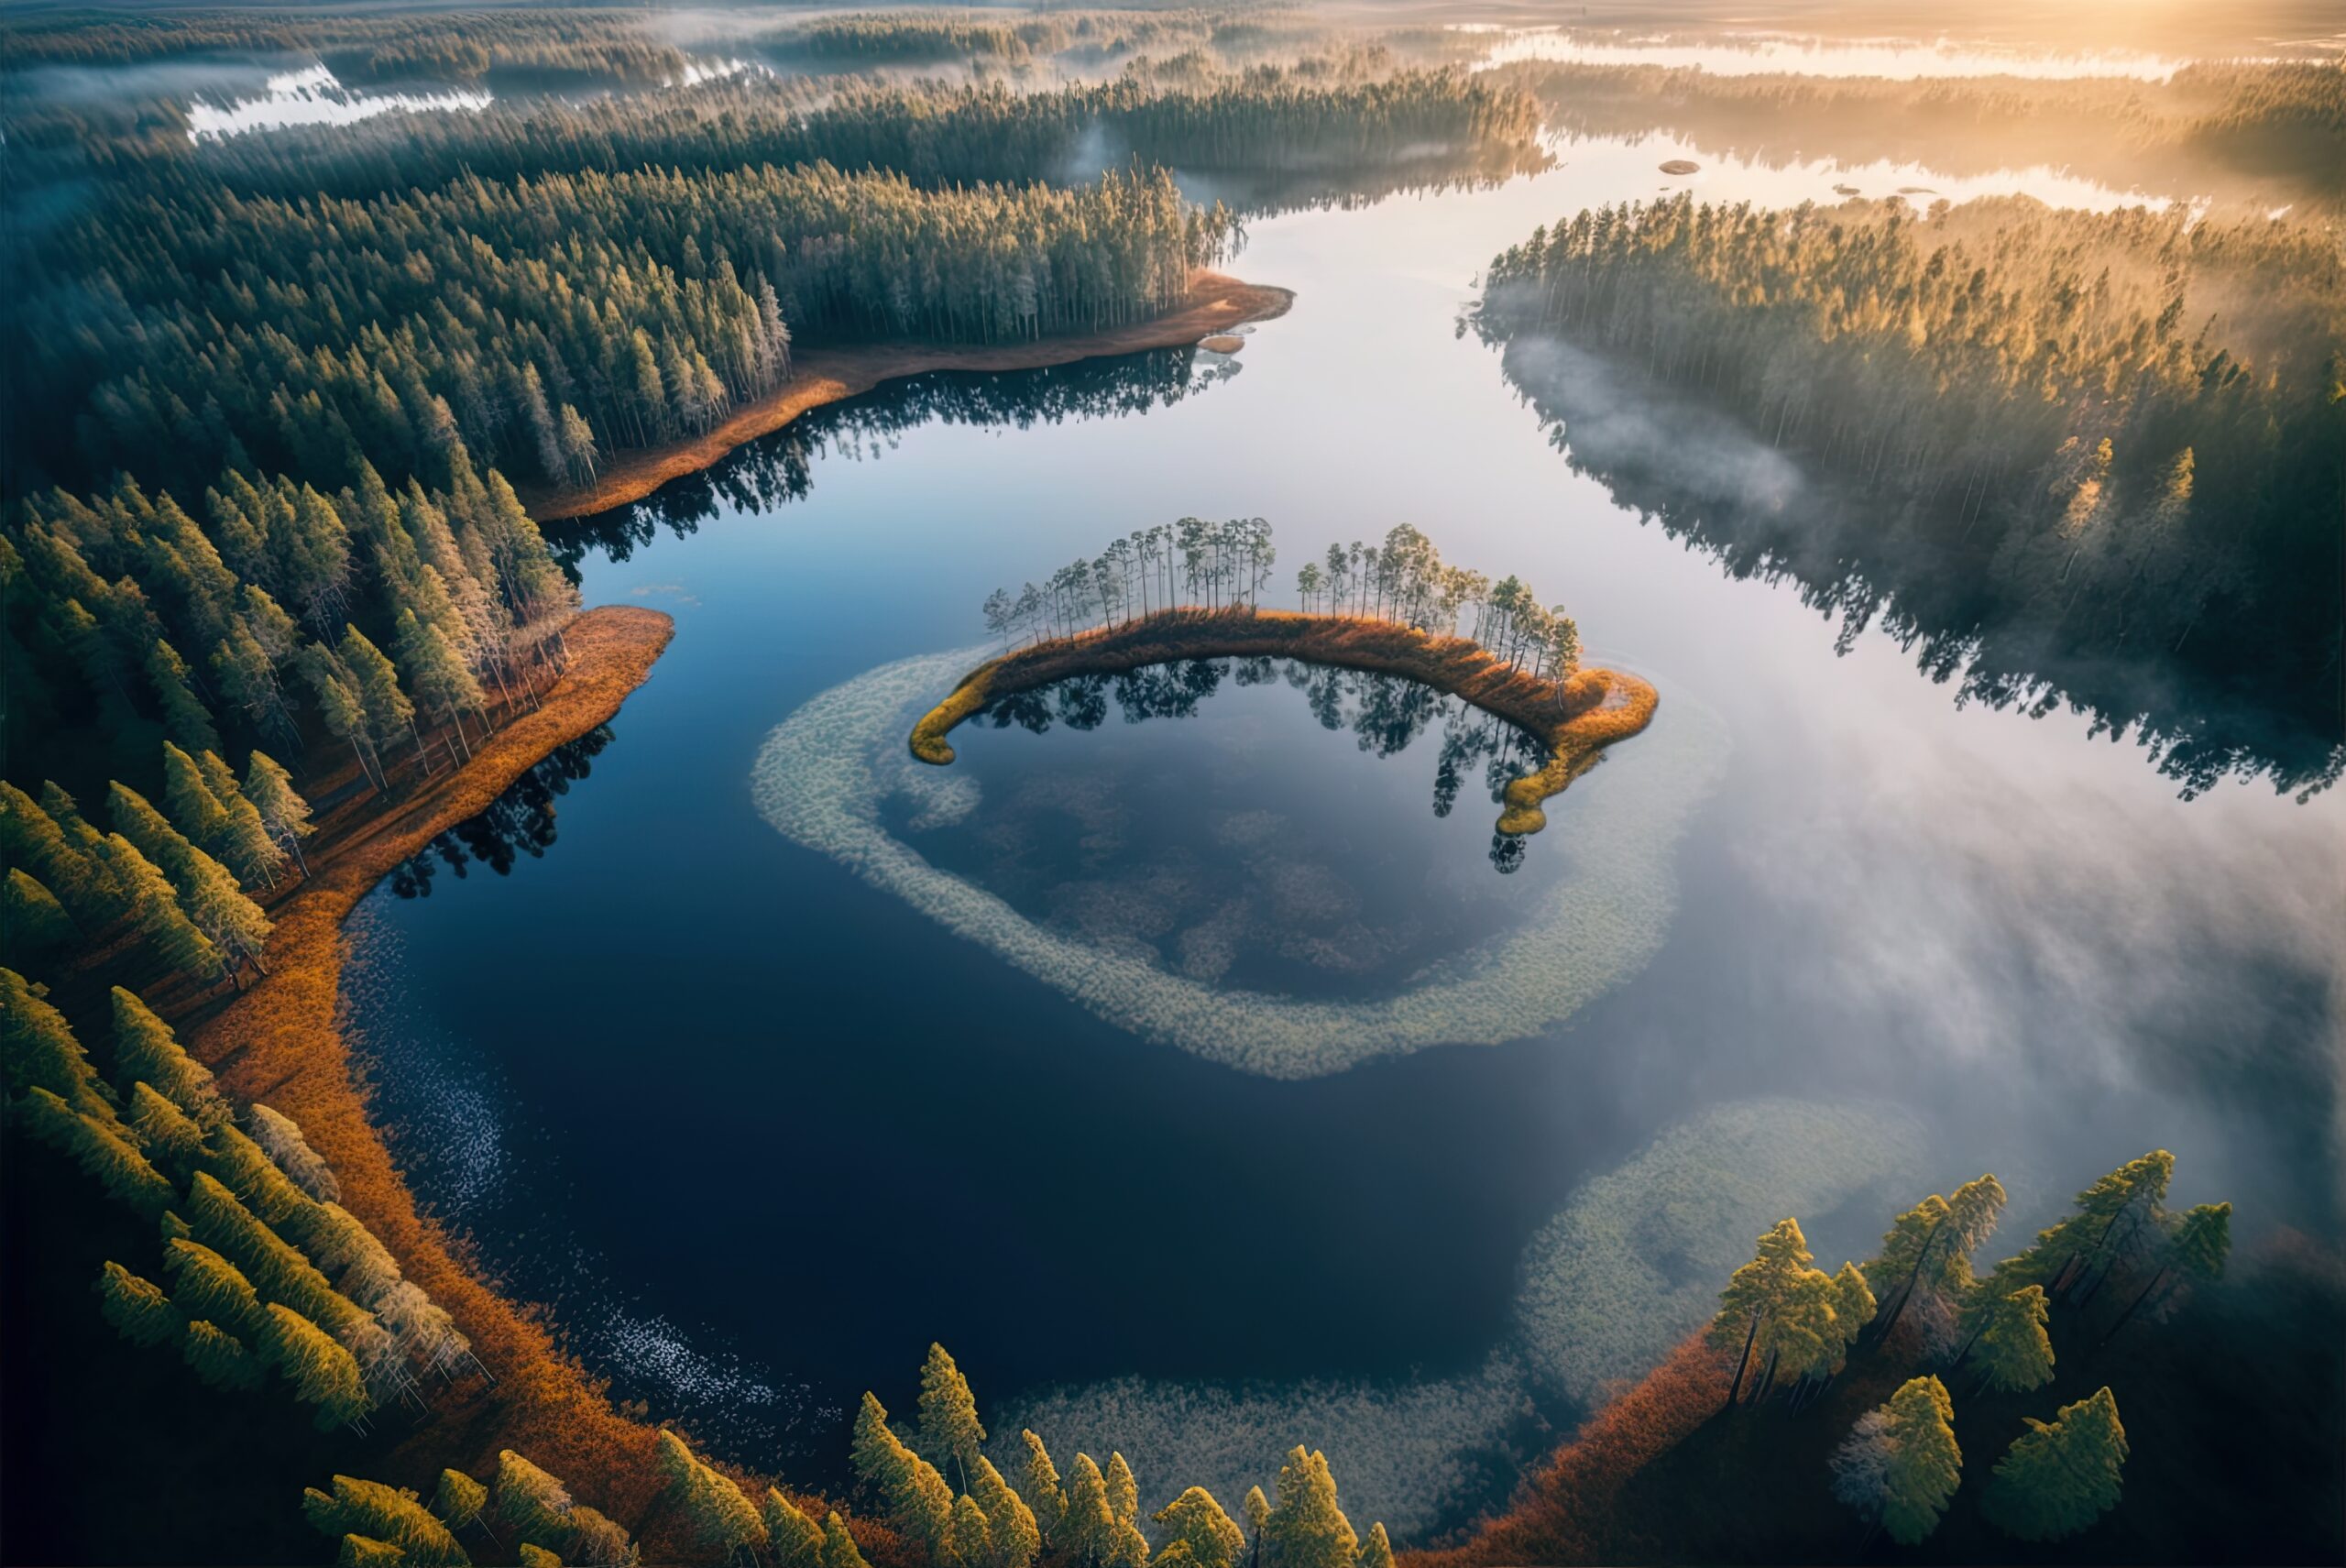 National Park, full of lakes in Estonia, seen from above on a misty morning.